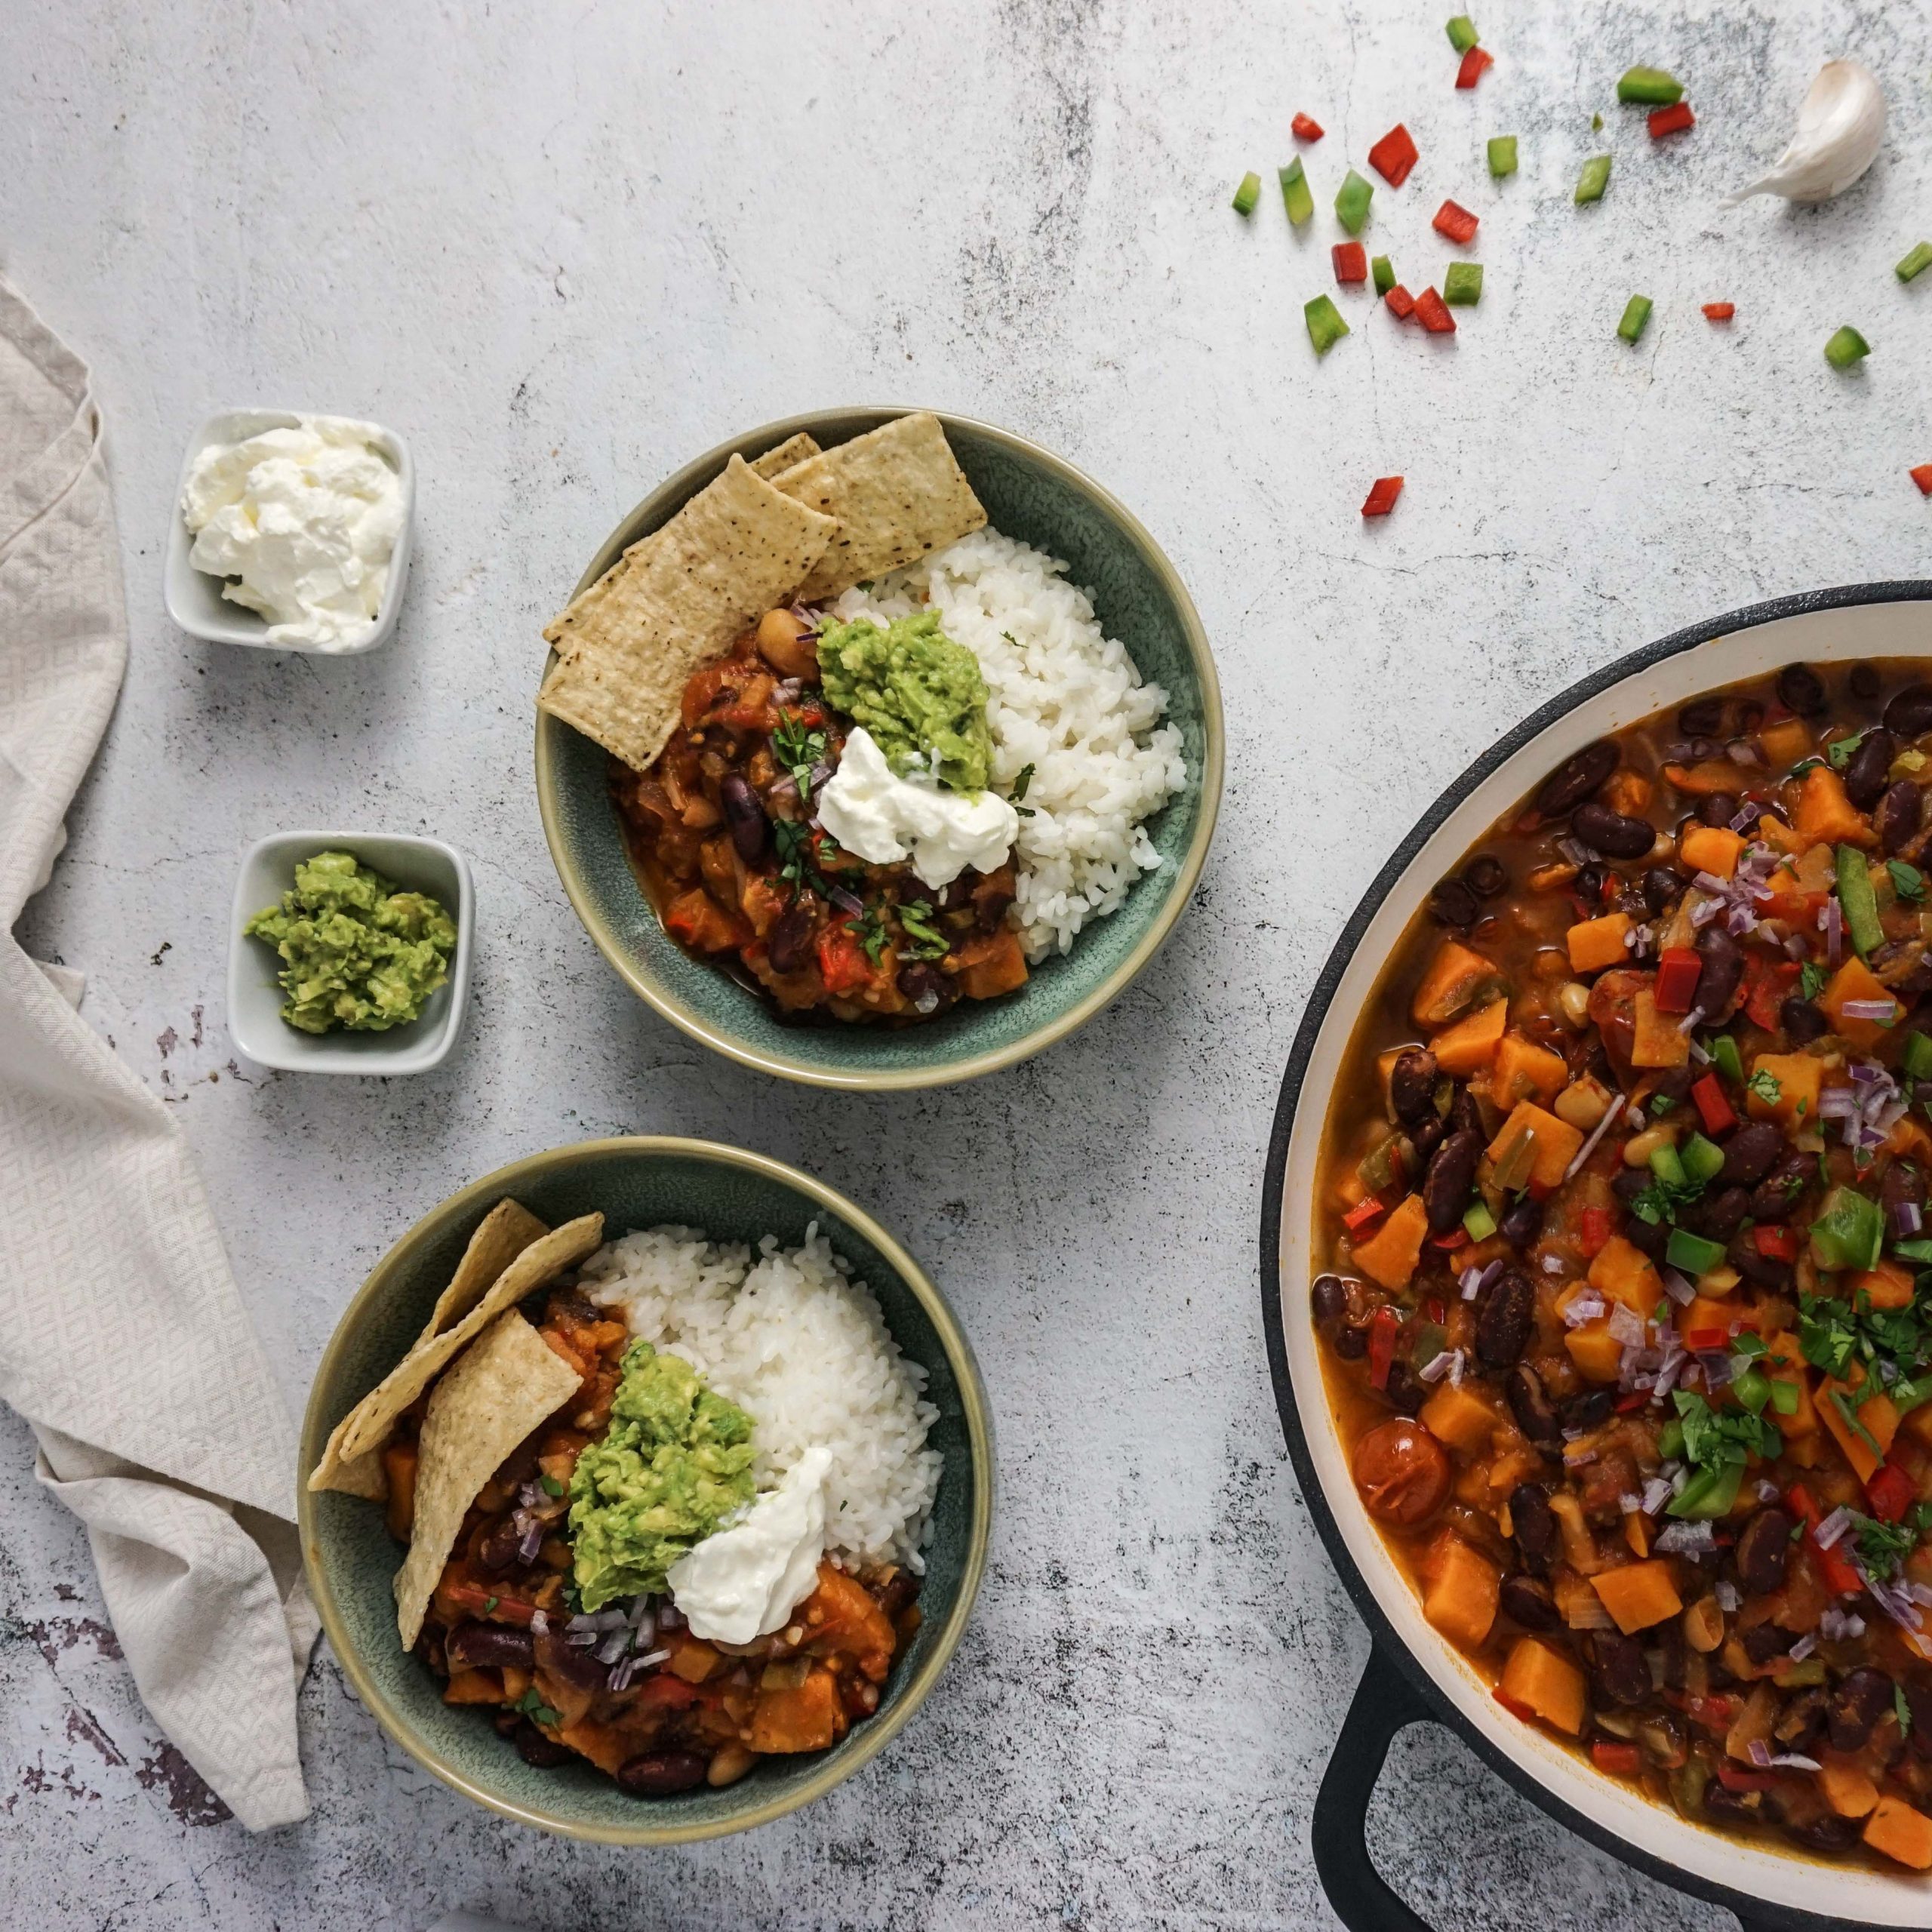 MEAT-FREE CHILLI BOWL » Reciprocal Recipes